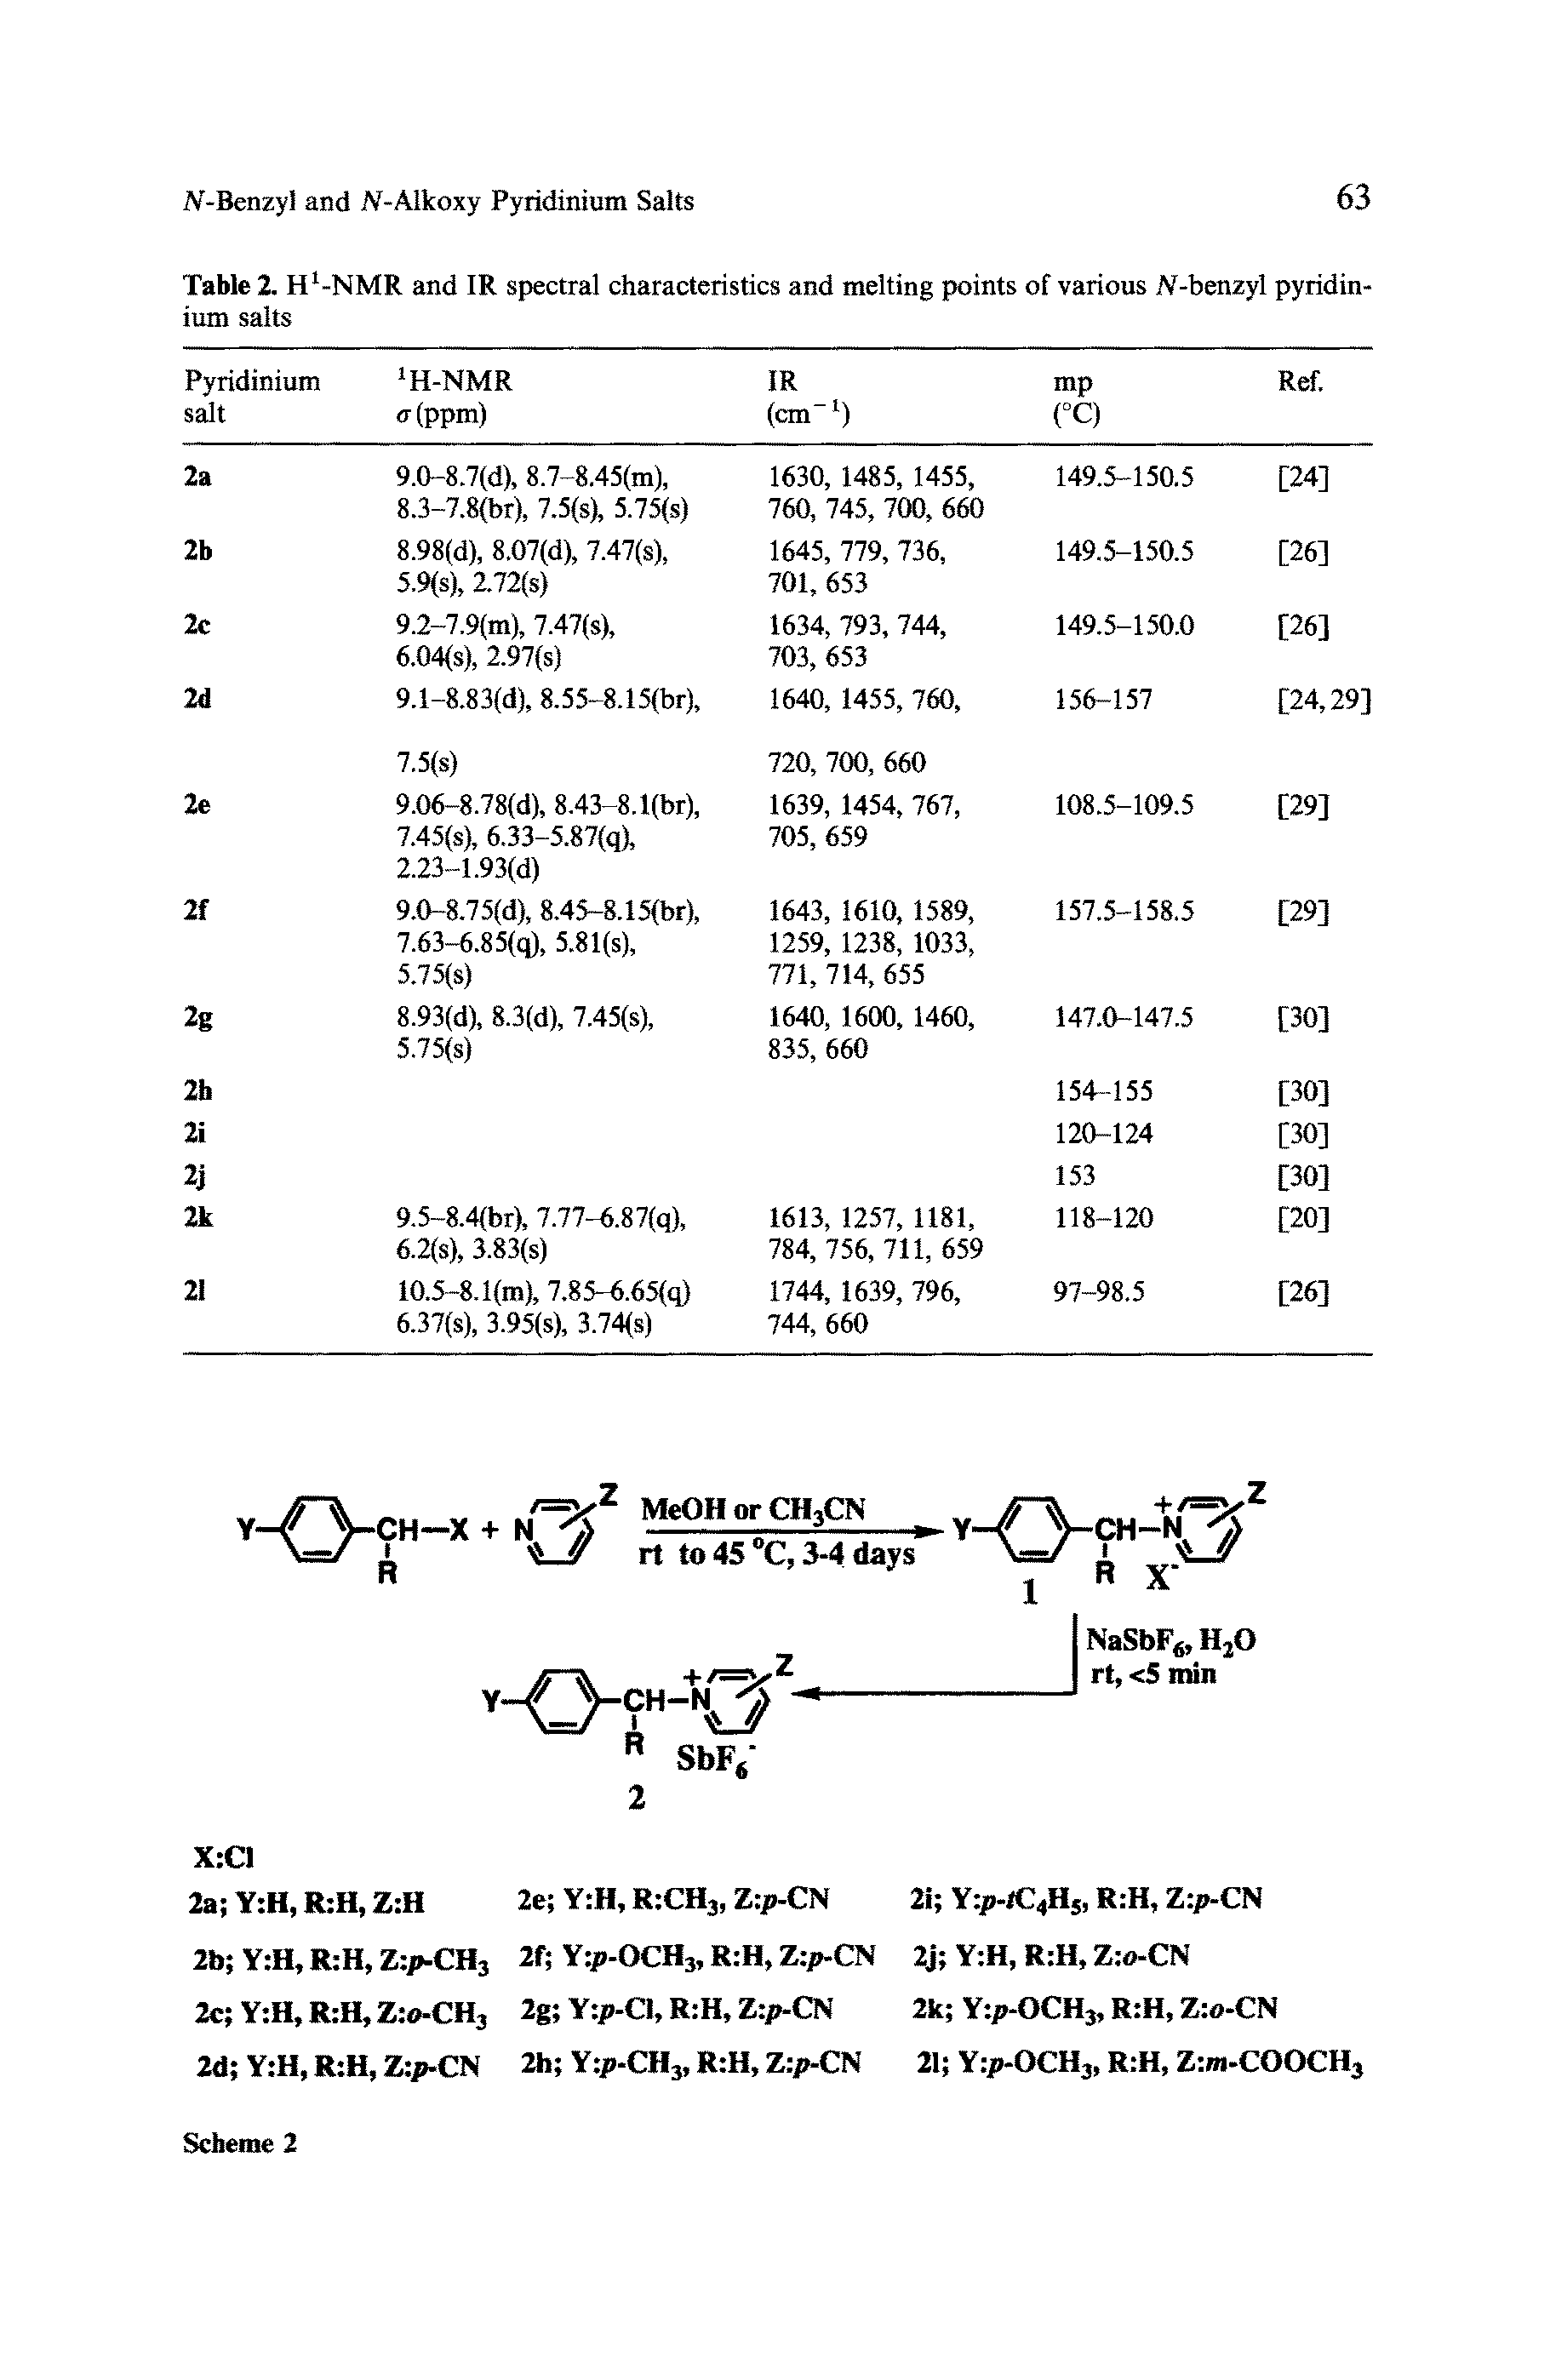 Table 2. H -NMR and IR spectral characteristics and melting points of various iV-benzyl pyridinium salts...